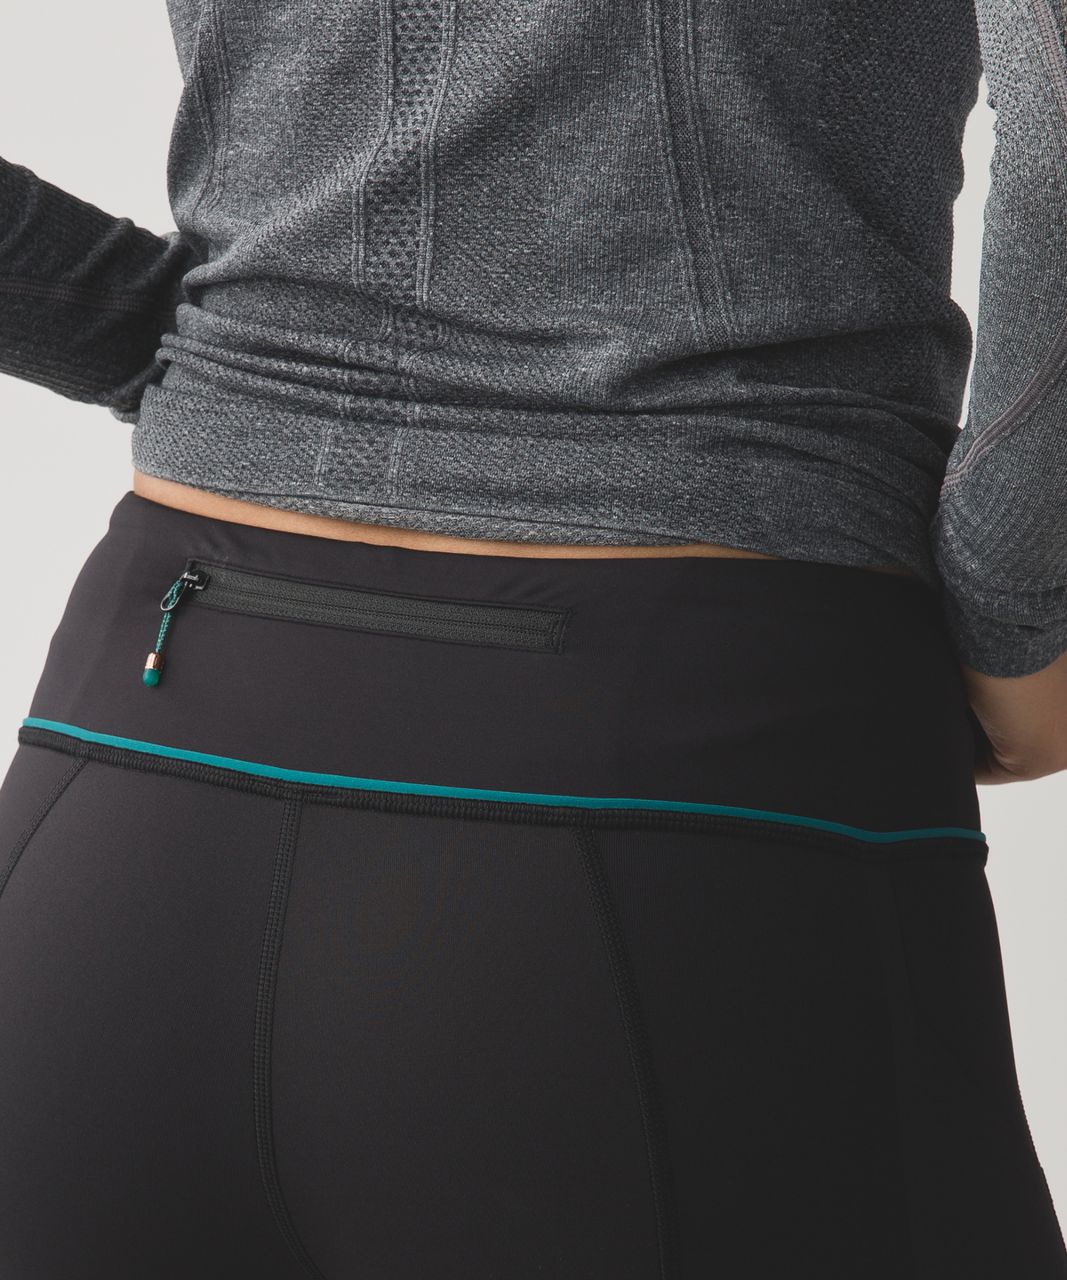 Lululemon Pace Rival Crop *Lights Out - Black / Forage Teal